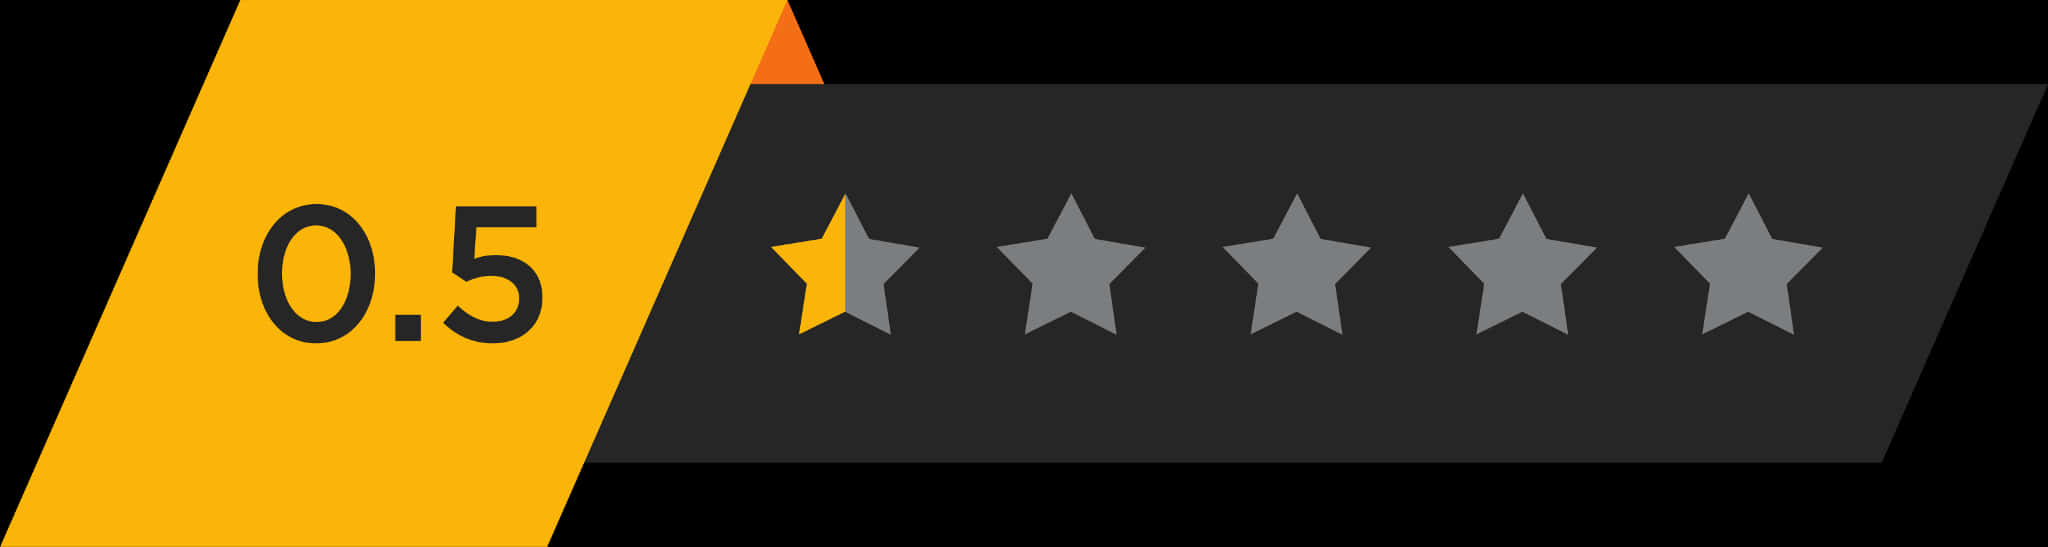 Half Star Rating Graphic PNG